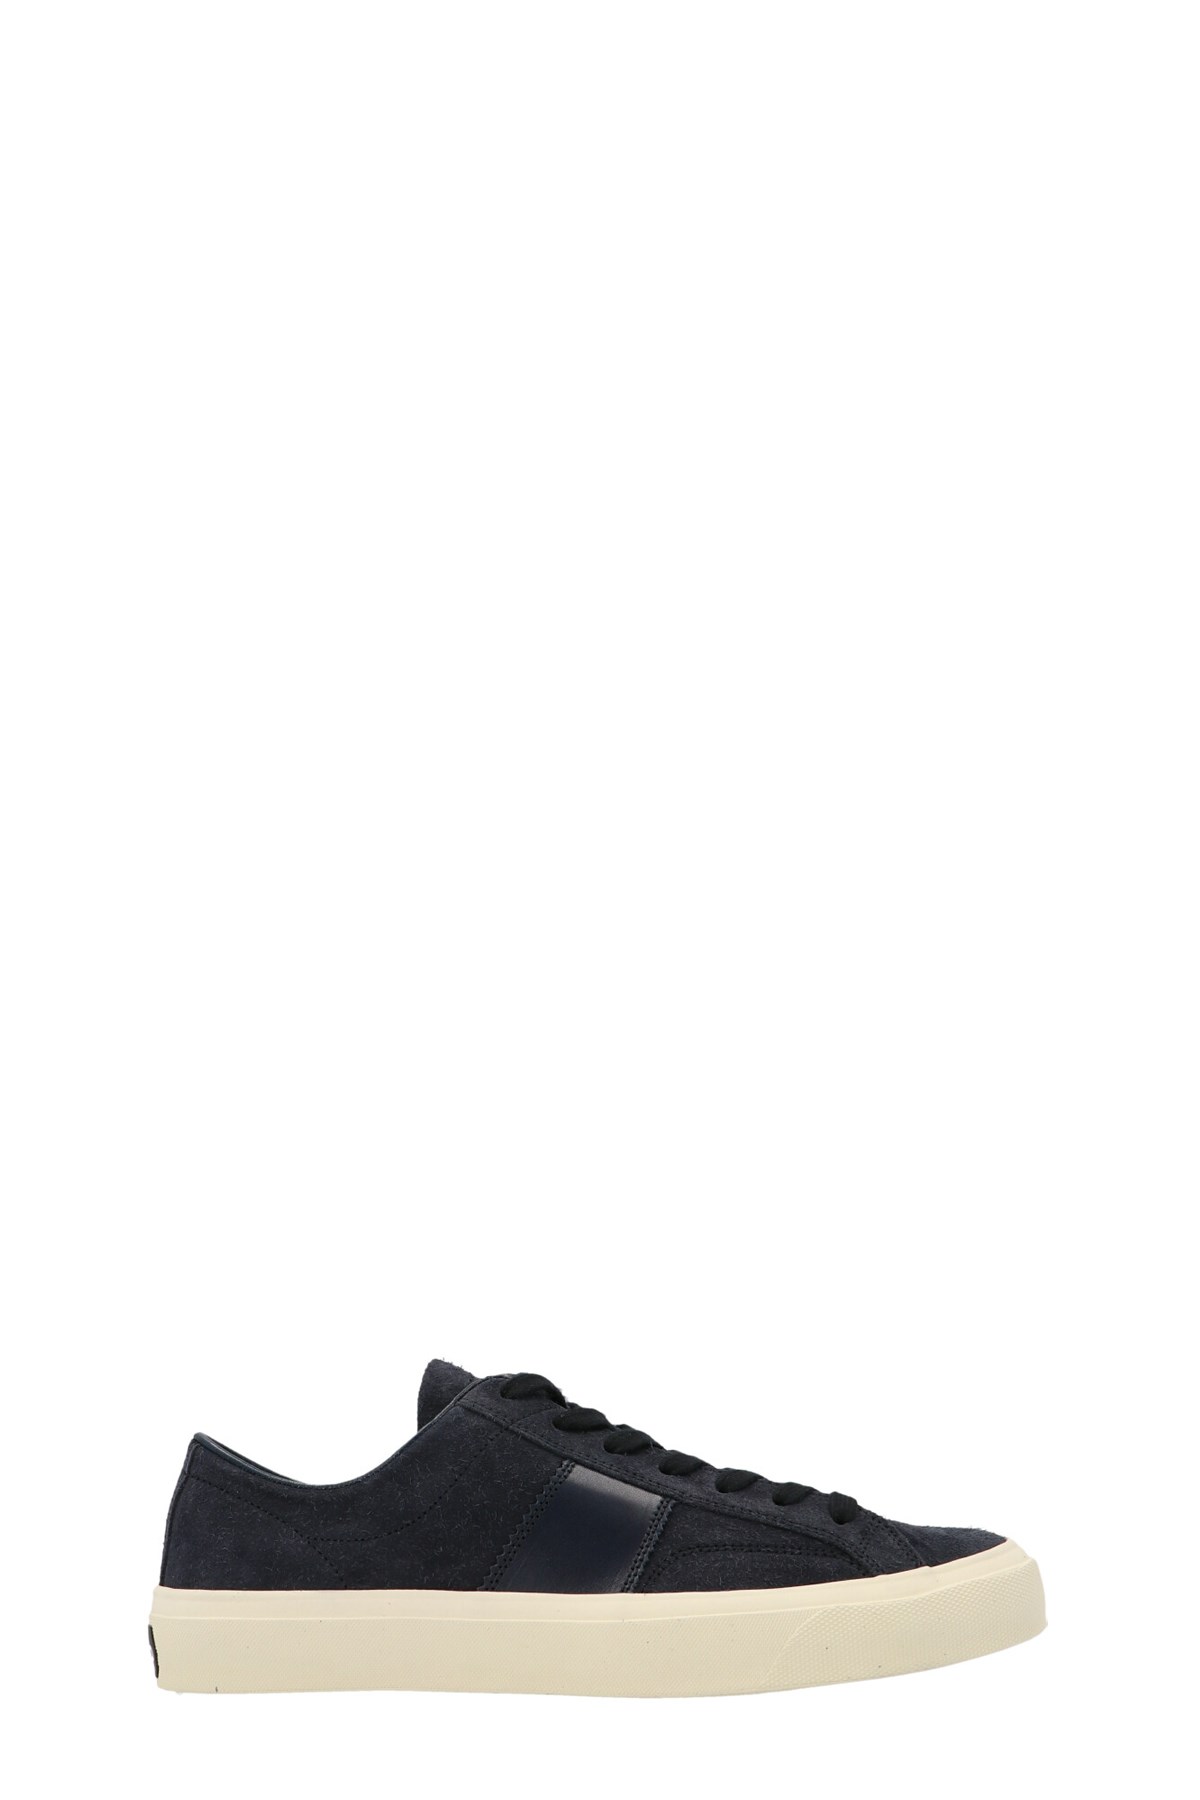 TOM FORD Sneakers 'Cambridge'